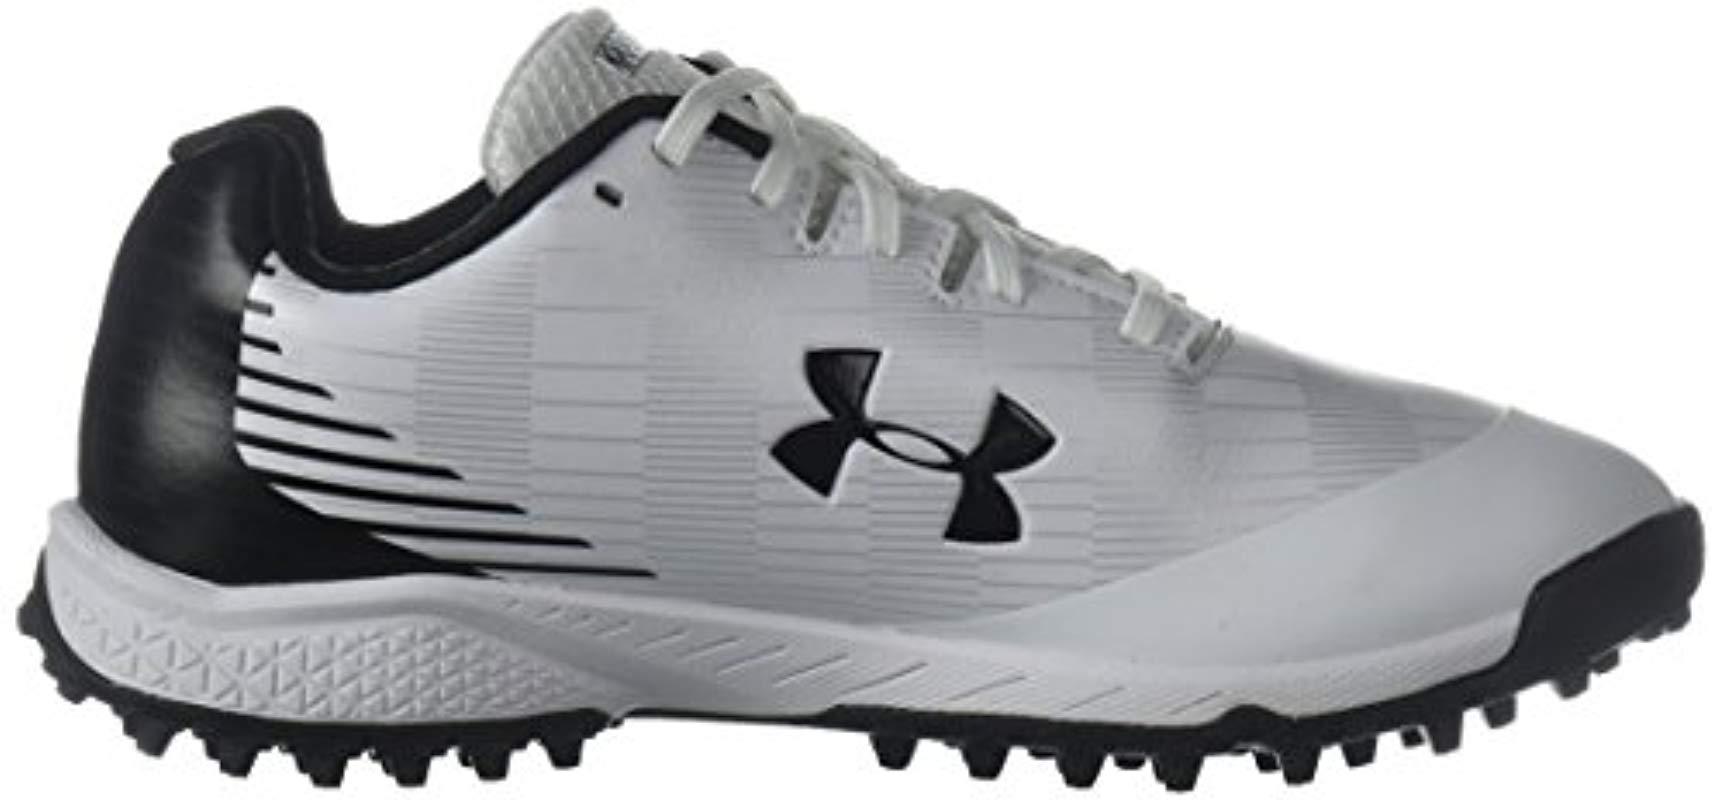 Under Armour Womens Finisher Turf Lacrosse Shoe